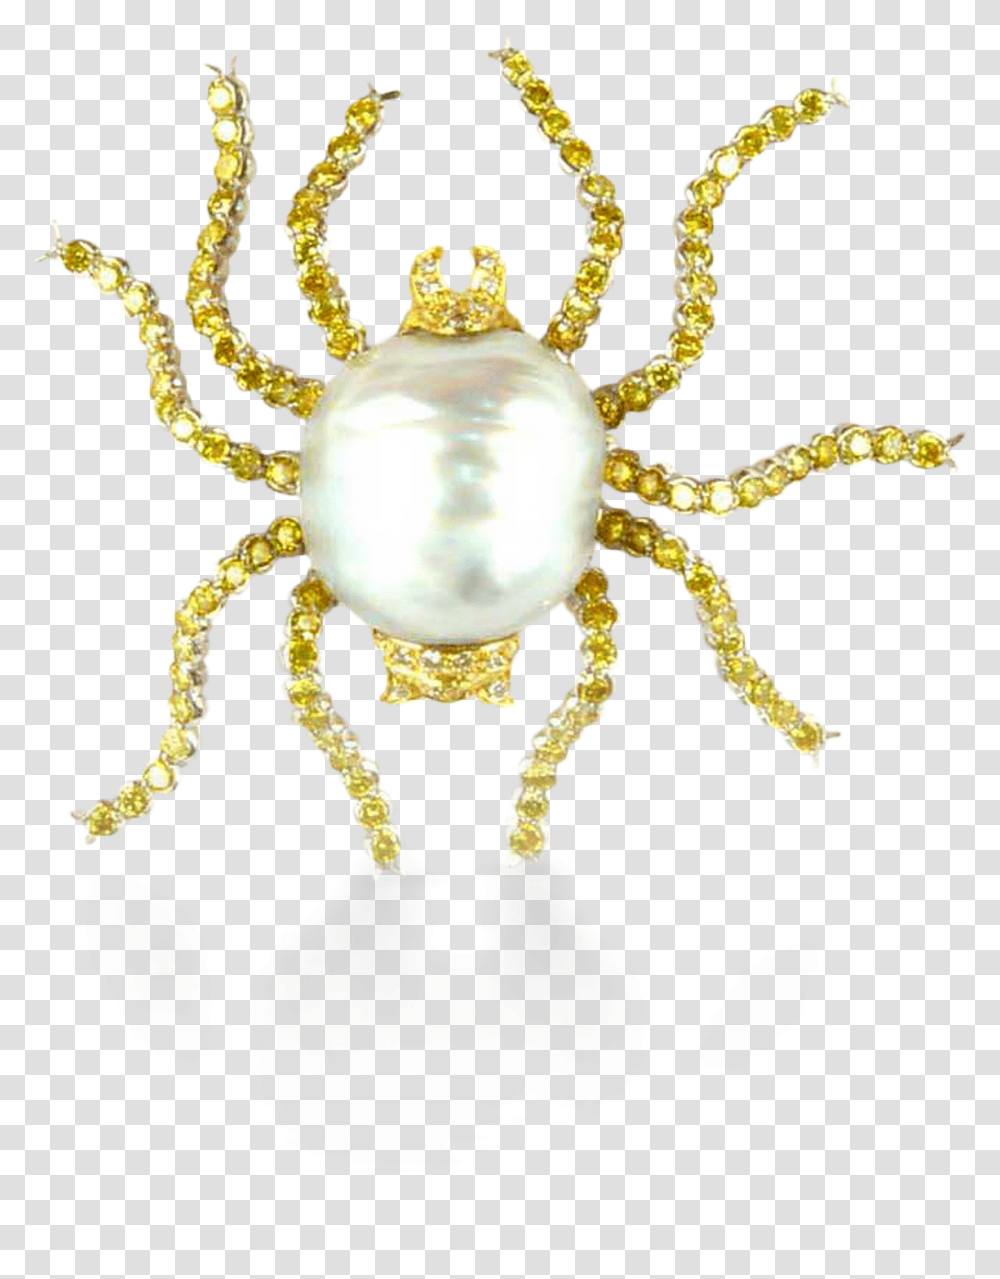 Spider Brooch Animalier Official Buccellati Website Gold Spider, Sea Life, Seafood, Crab, Invertebrate Transparent Png